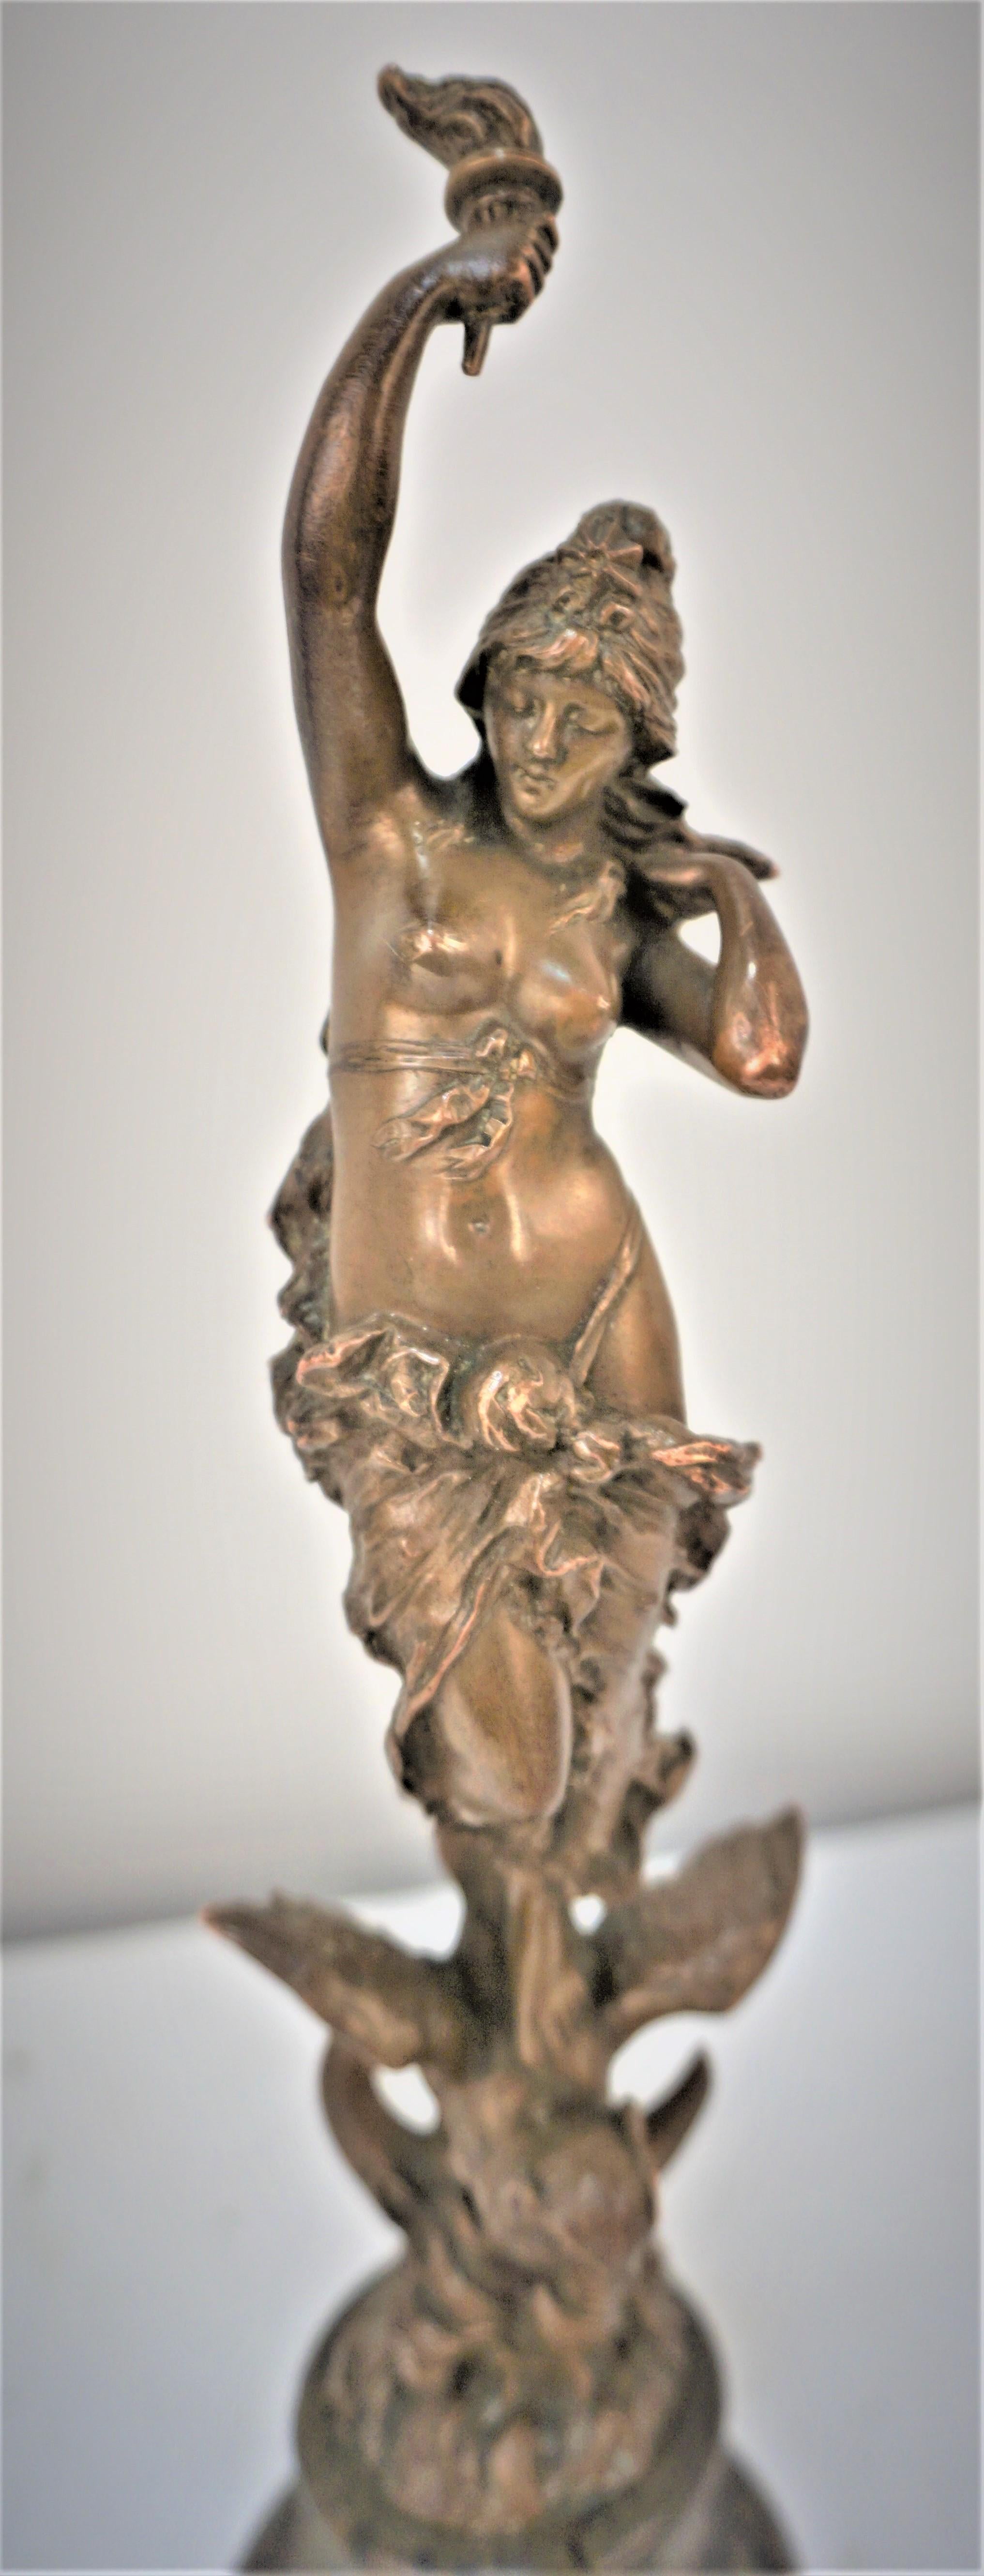 Beautiful art nouveau bronze sculpture of nude figure standing on Owel with marble base.
By Paul Aichele 1859-1920.